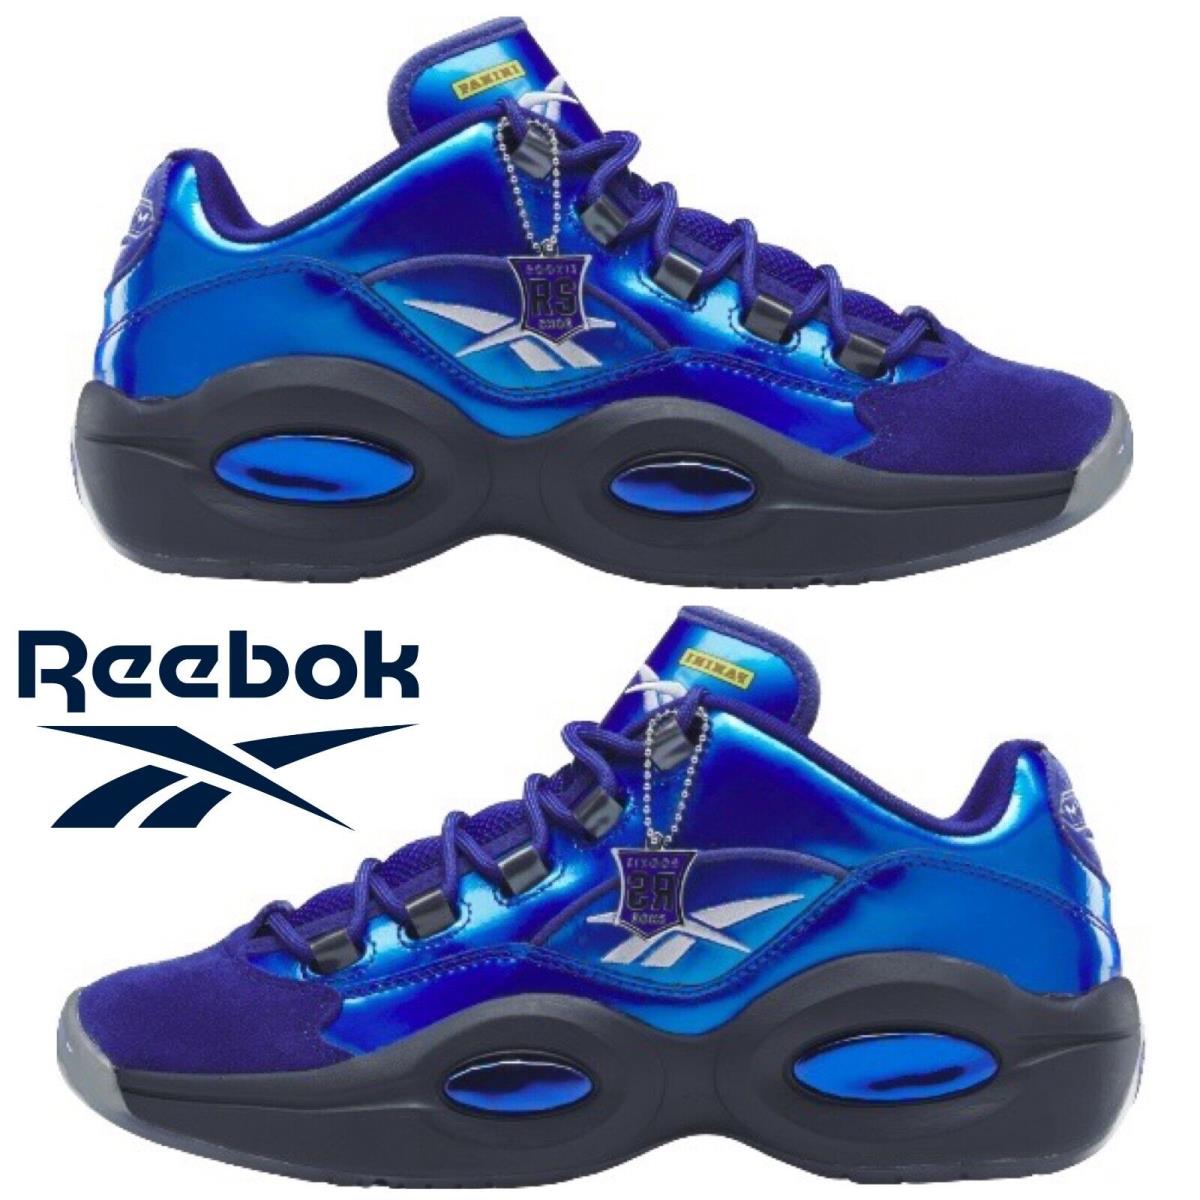 Reebok Question Low Panini Basketball Shoes Men`s Sneakers Running Casual Sport - Blue, Manufacturer: Navy